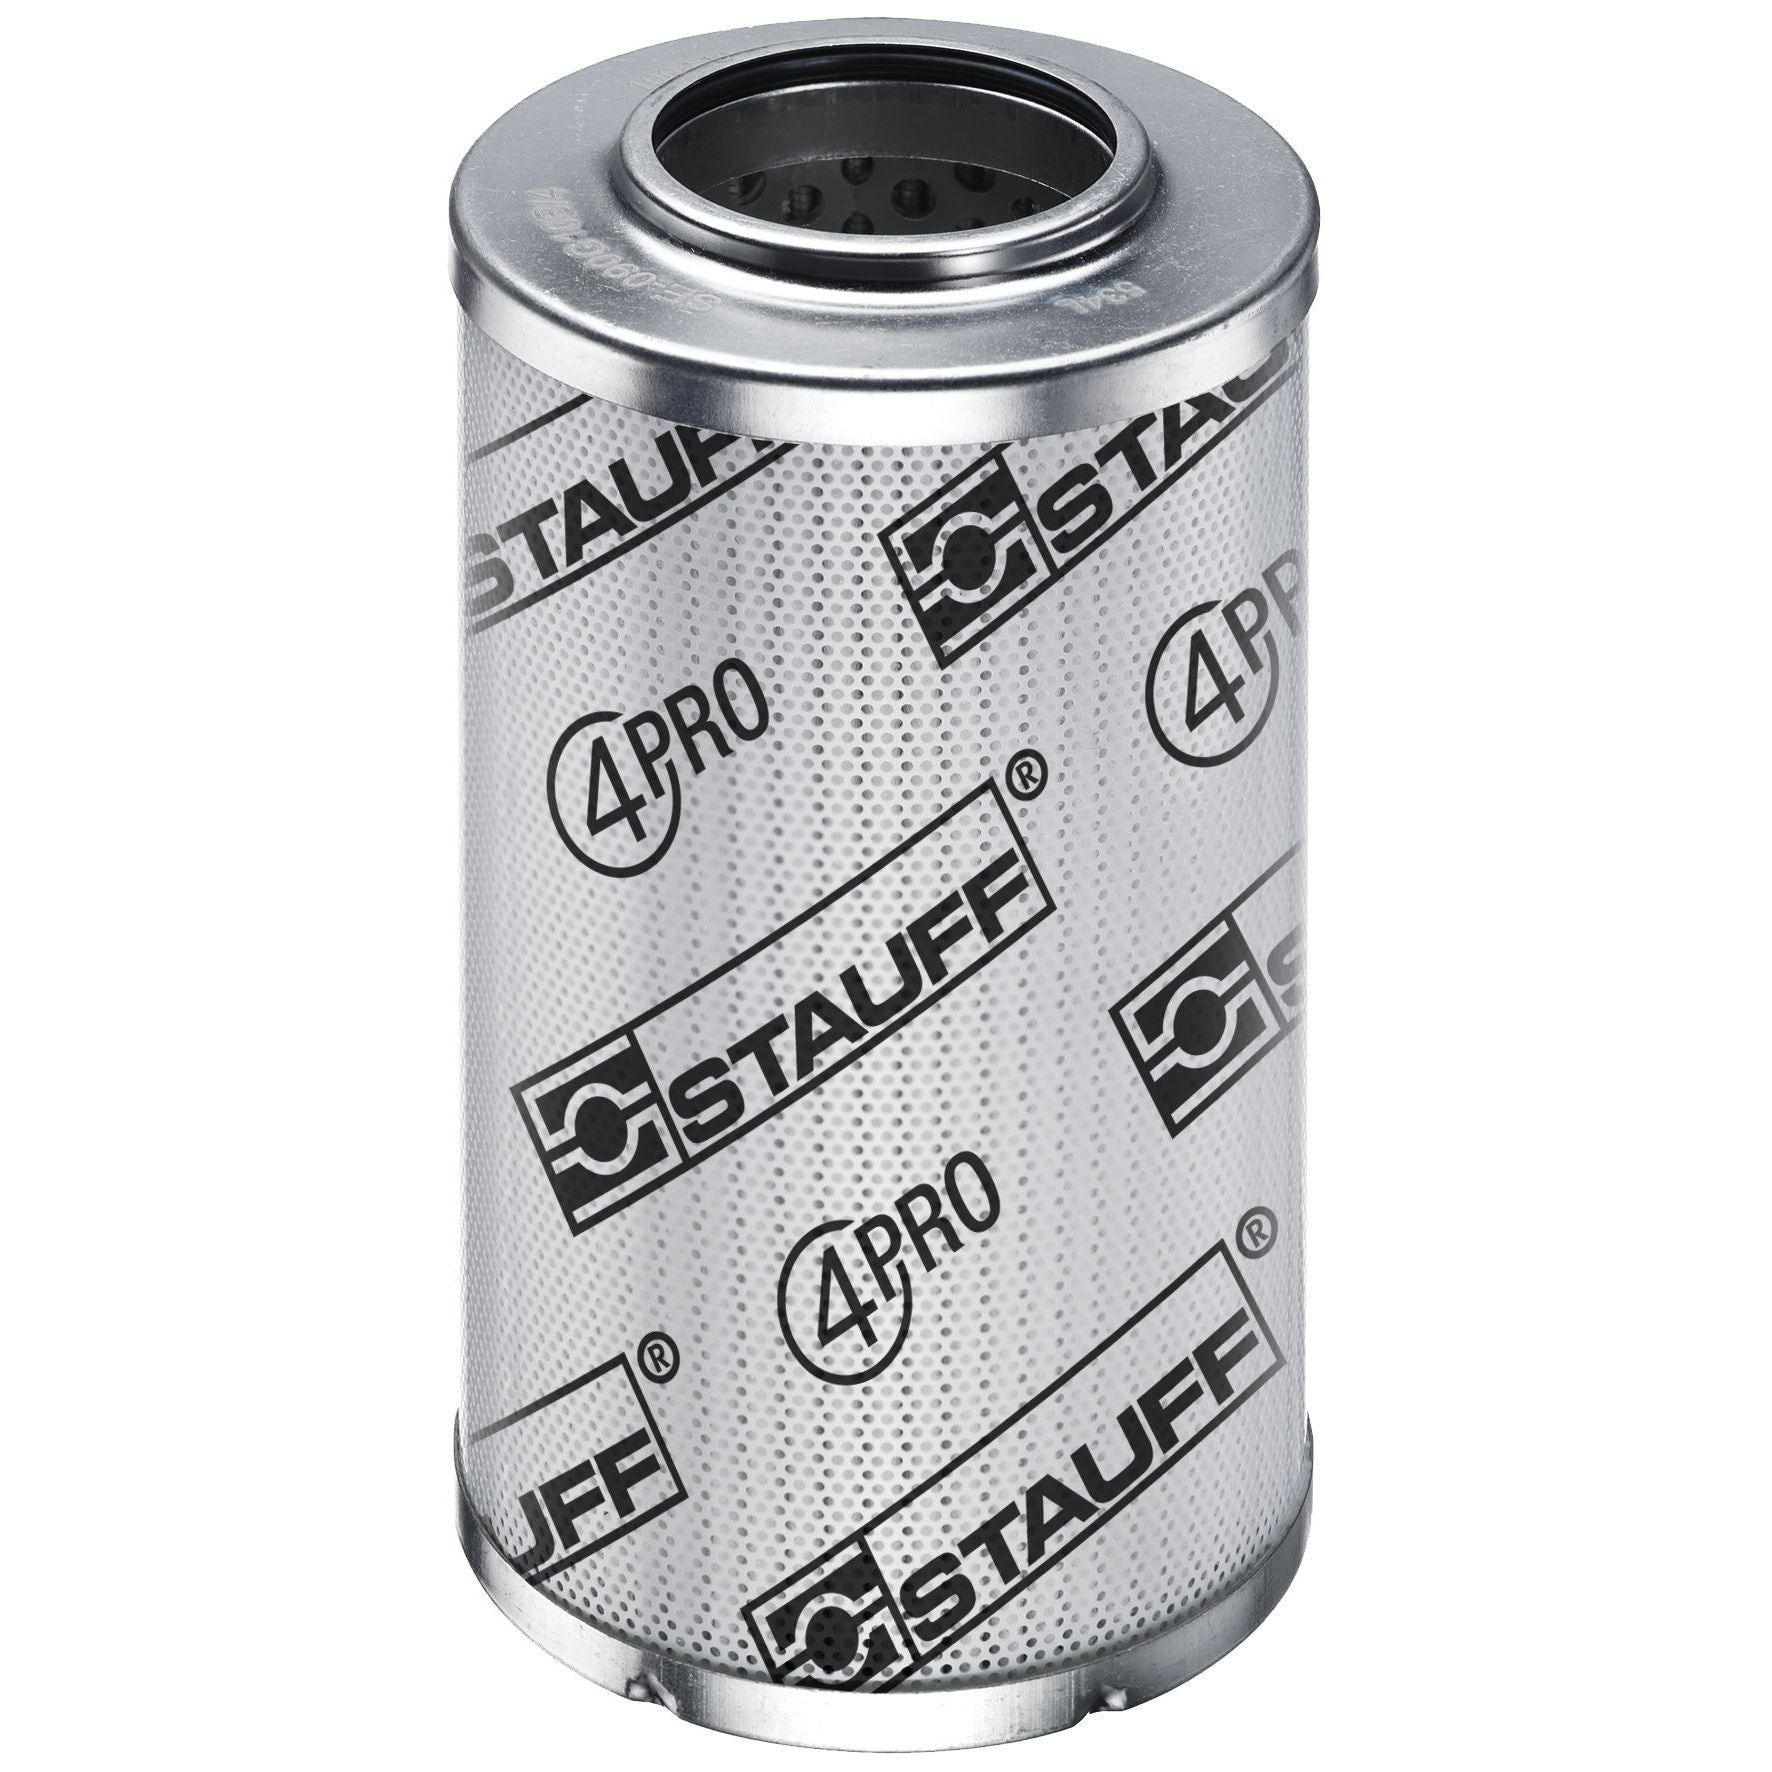 SE-045H05E/4 : Stauff SF-045 Series Filter Element, 5 Micron, Synthetic, 3045psi Collapse Differential, EPDM Seals